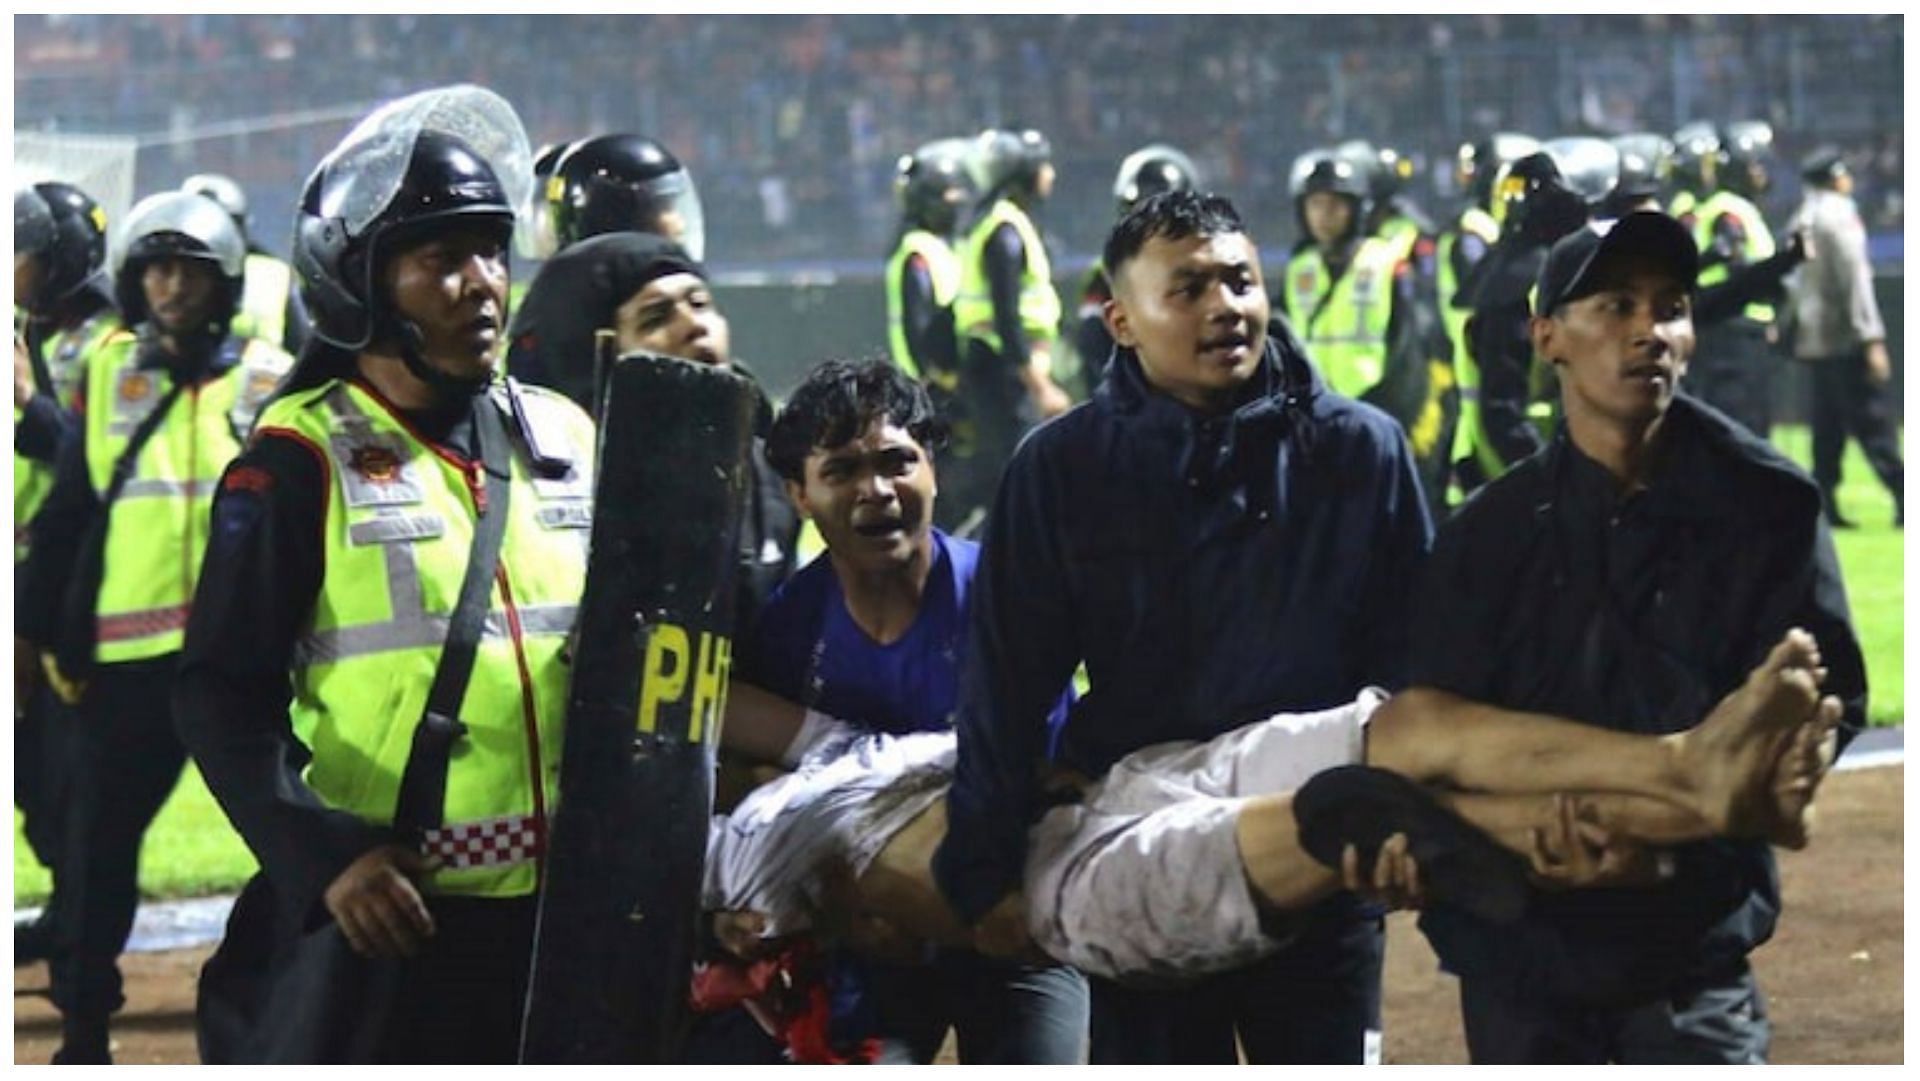 The incident was spurred by a clash between the fans of 2 different football teams (AP Photo/Yudha Prabowo)